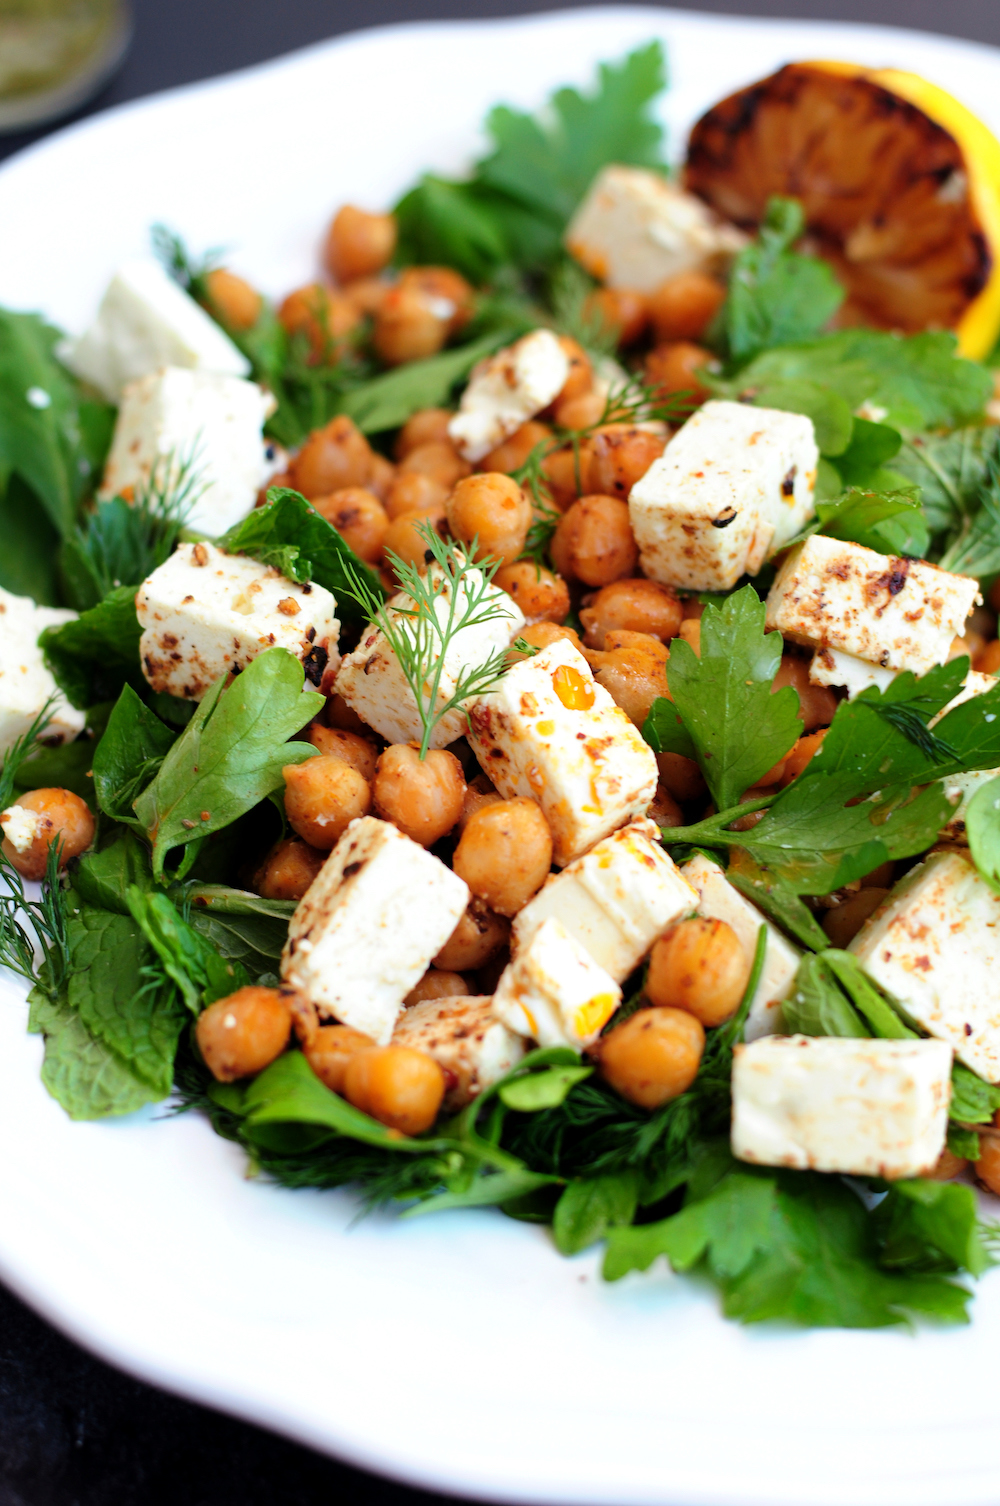 Fresh Herb Salad With Feta, Toasted Chickpeas, and Warming Spices